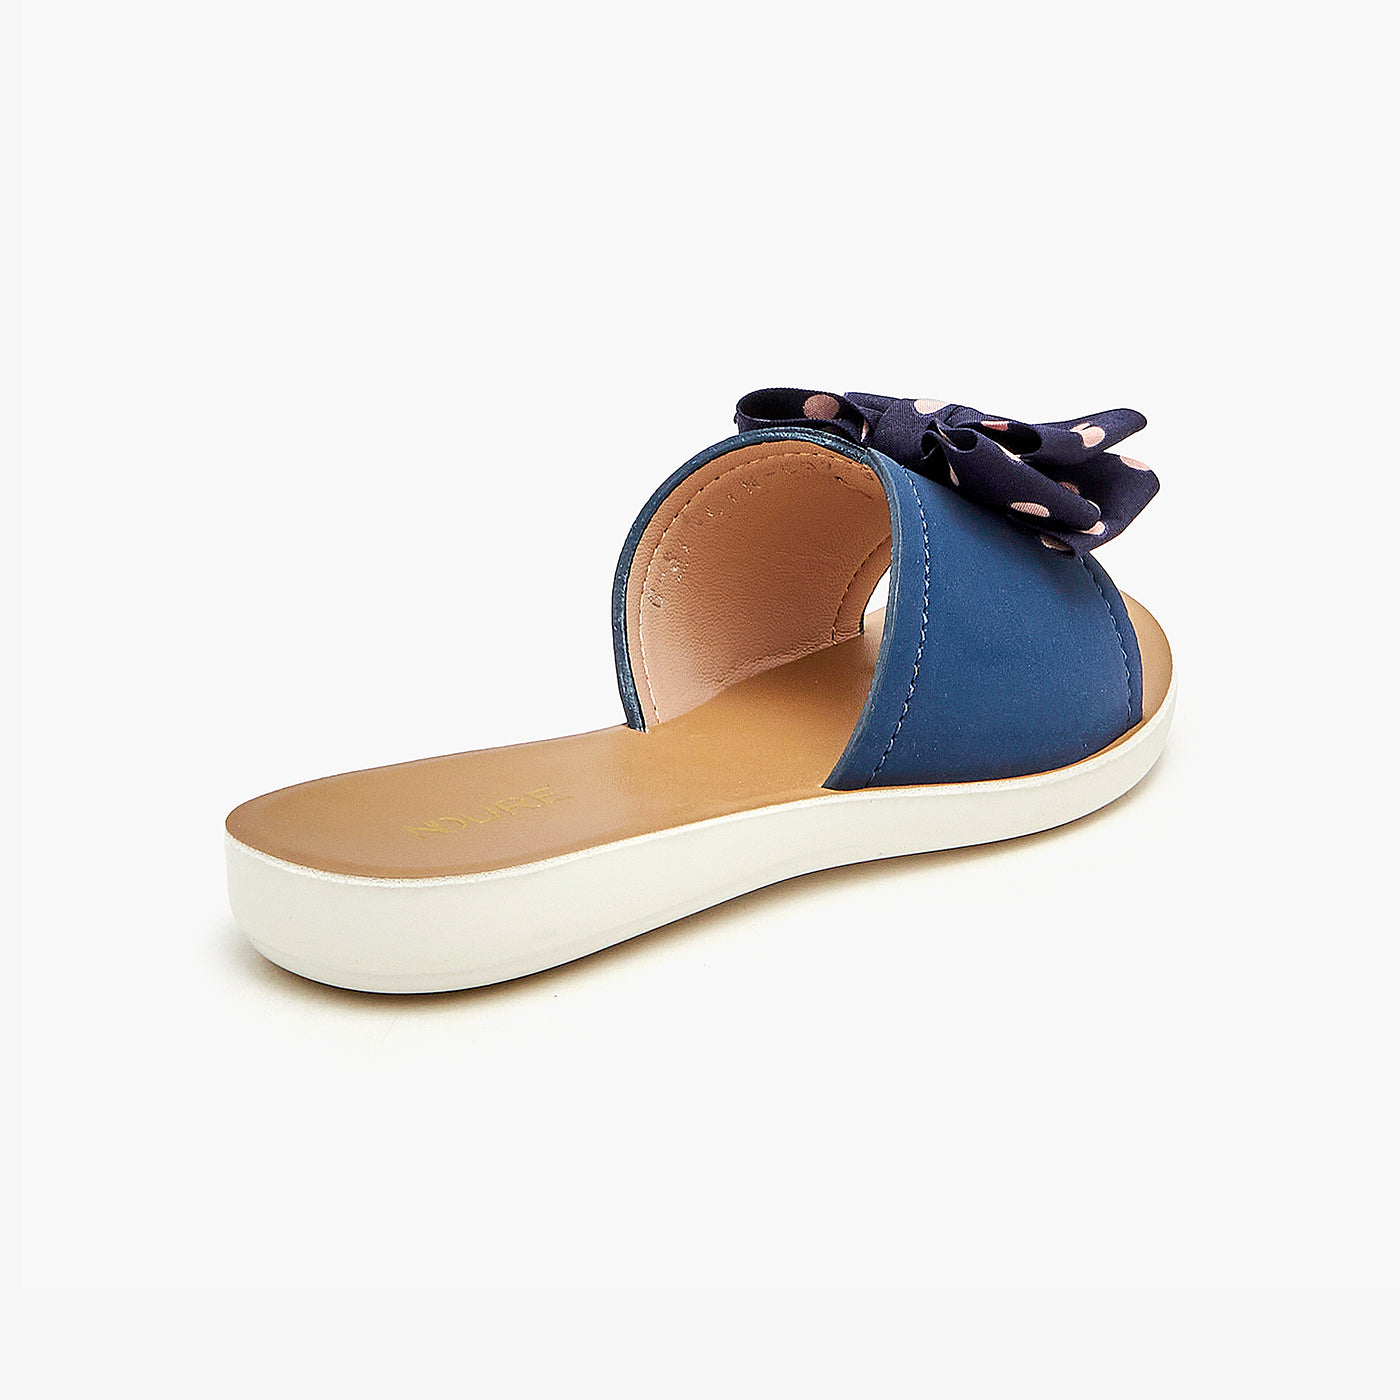 Top best chappal for girls